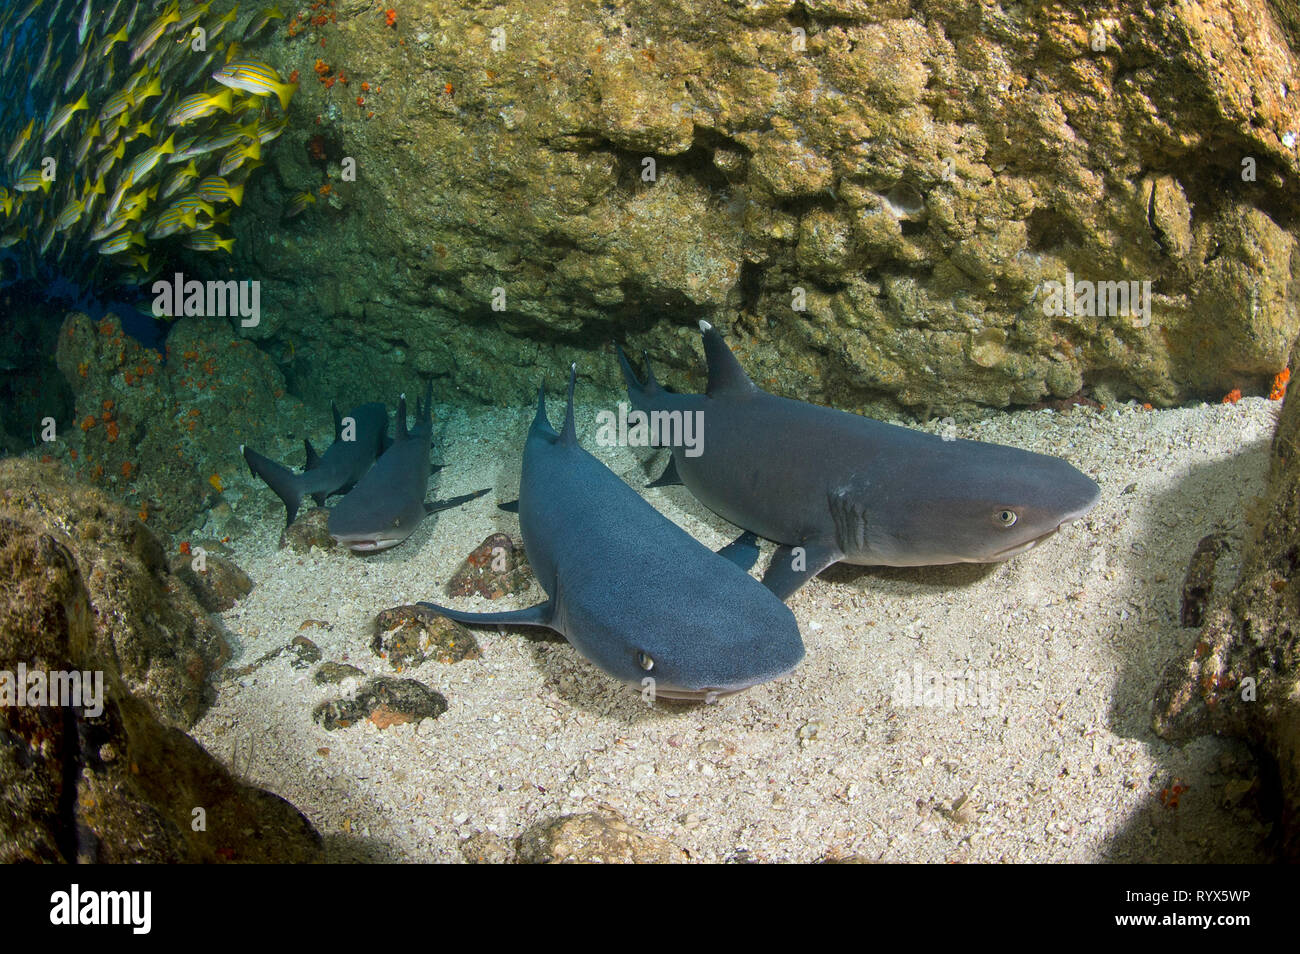 Whitetip reef sharks (Triaenodon obesus), group resting on seabed, Cocos island, Costa Rica Stock Photo